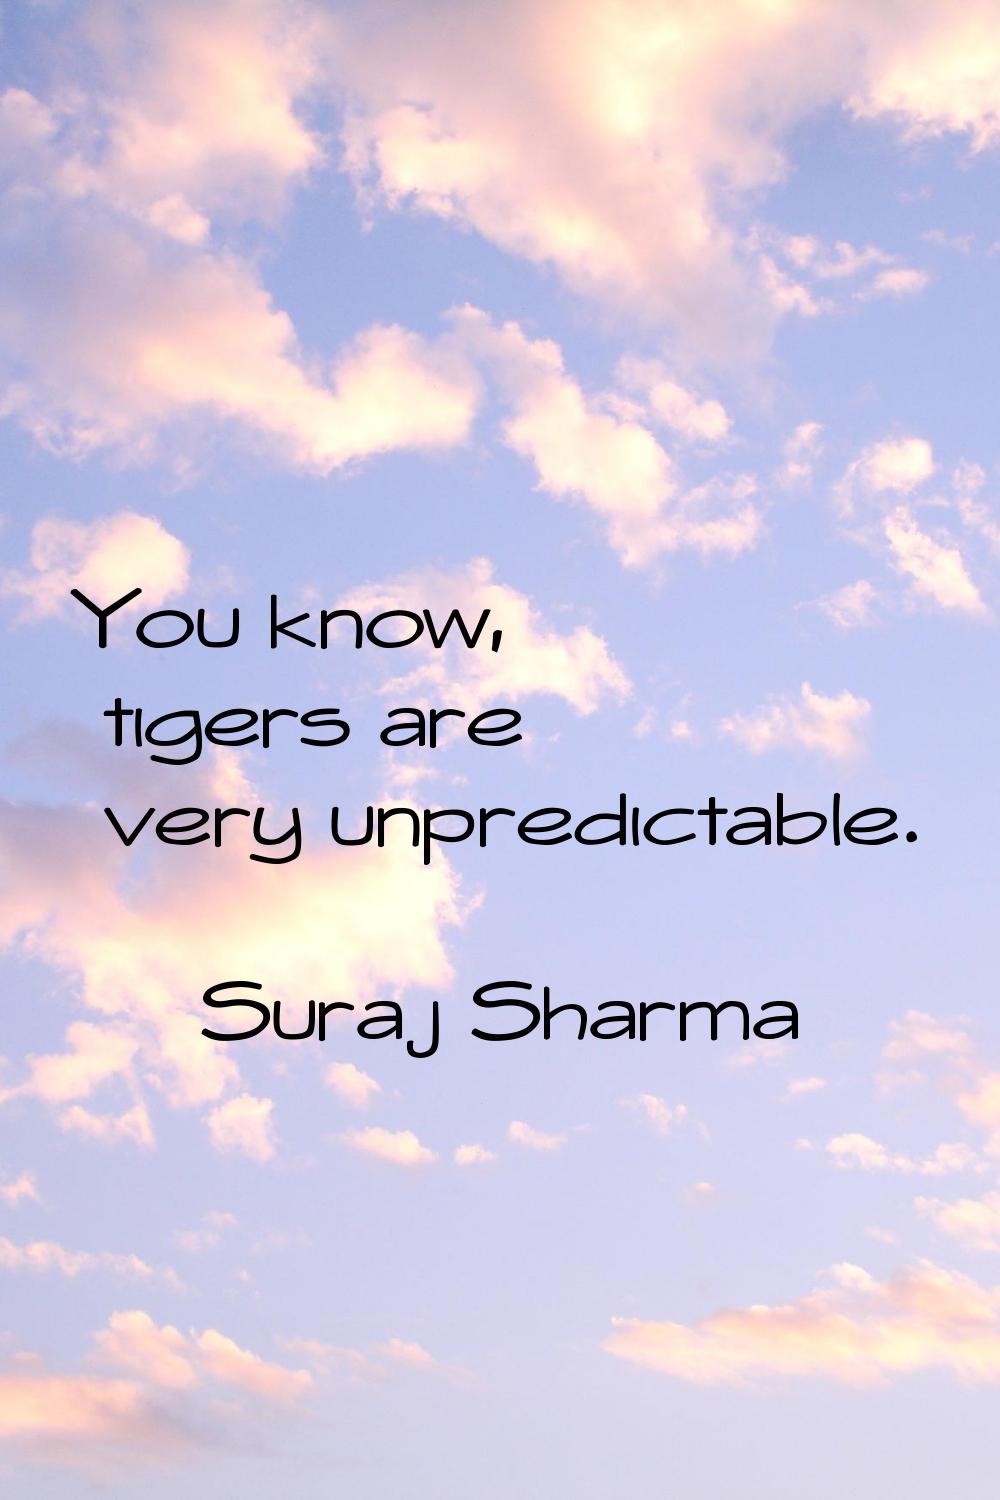 You know, tigers are very unpredictable.